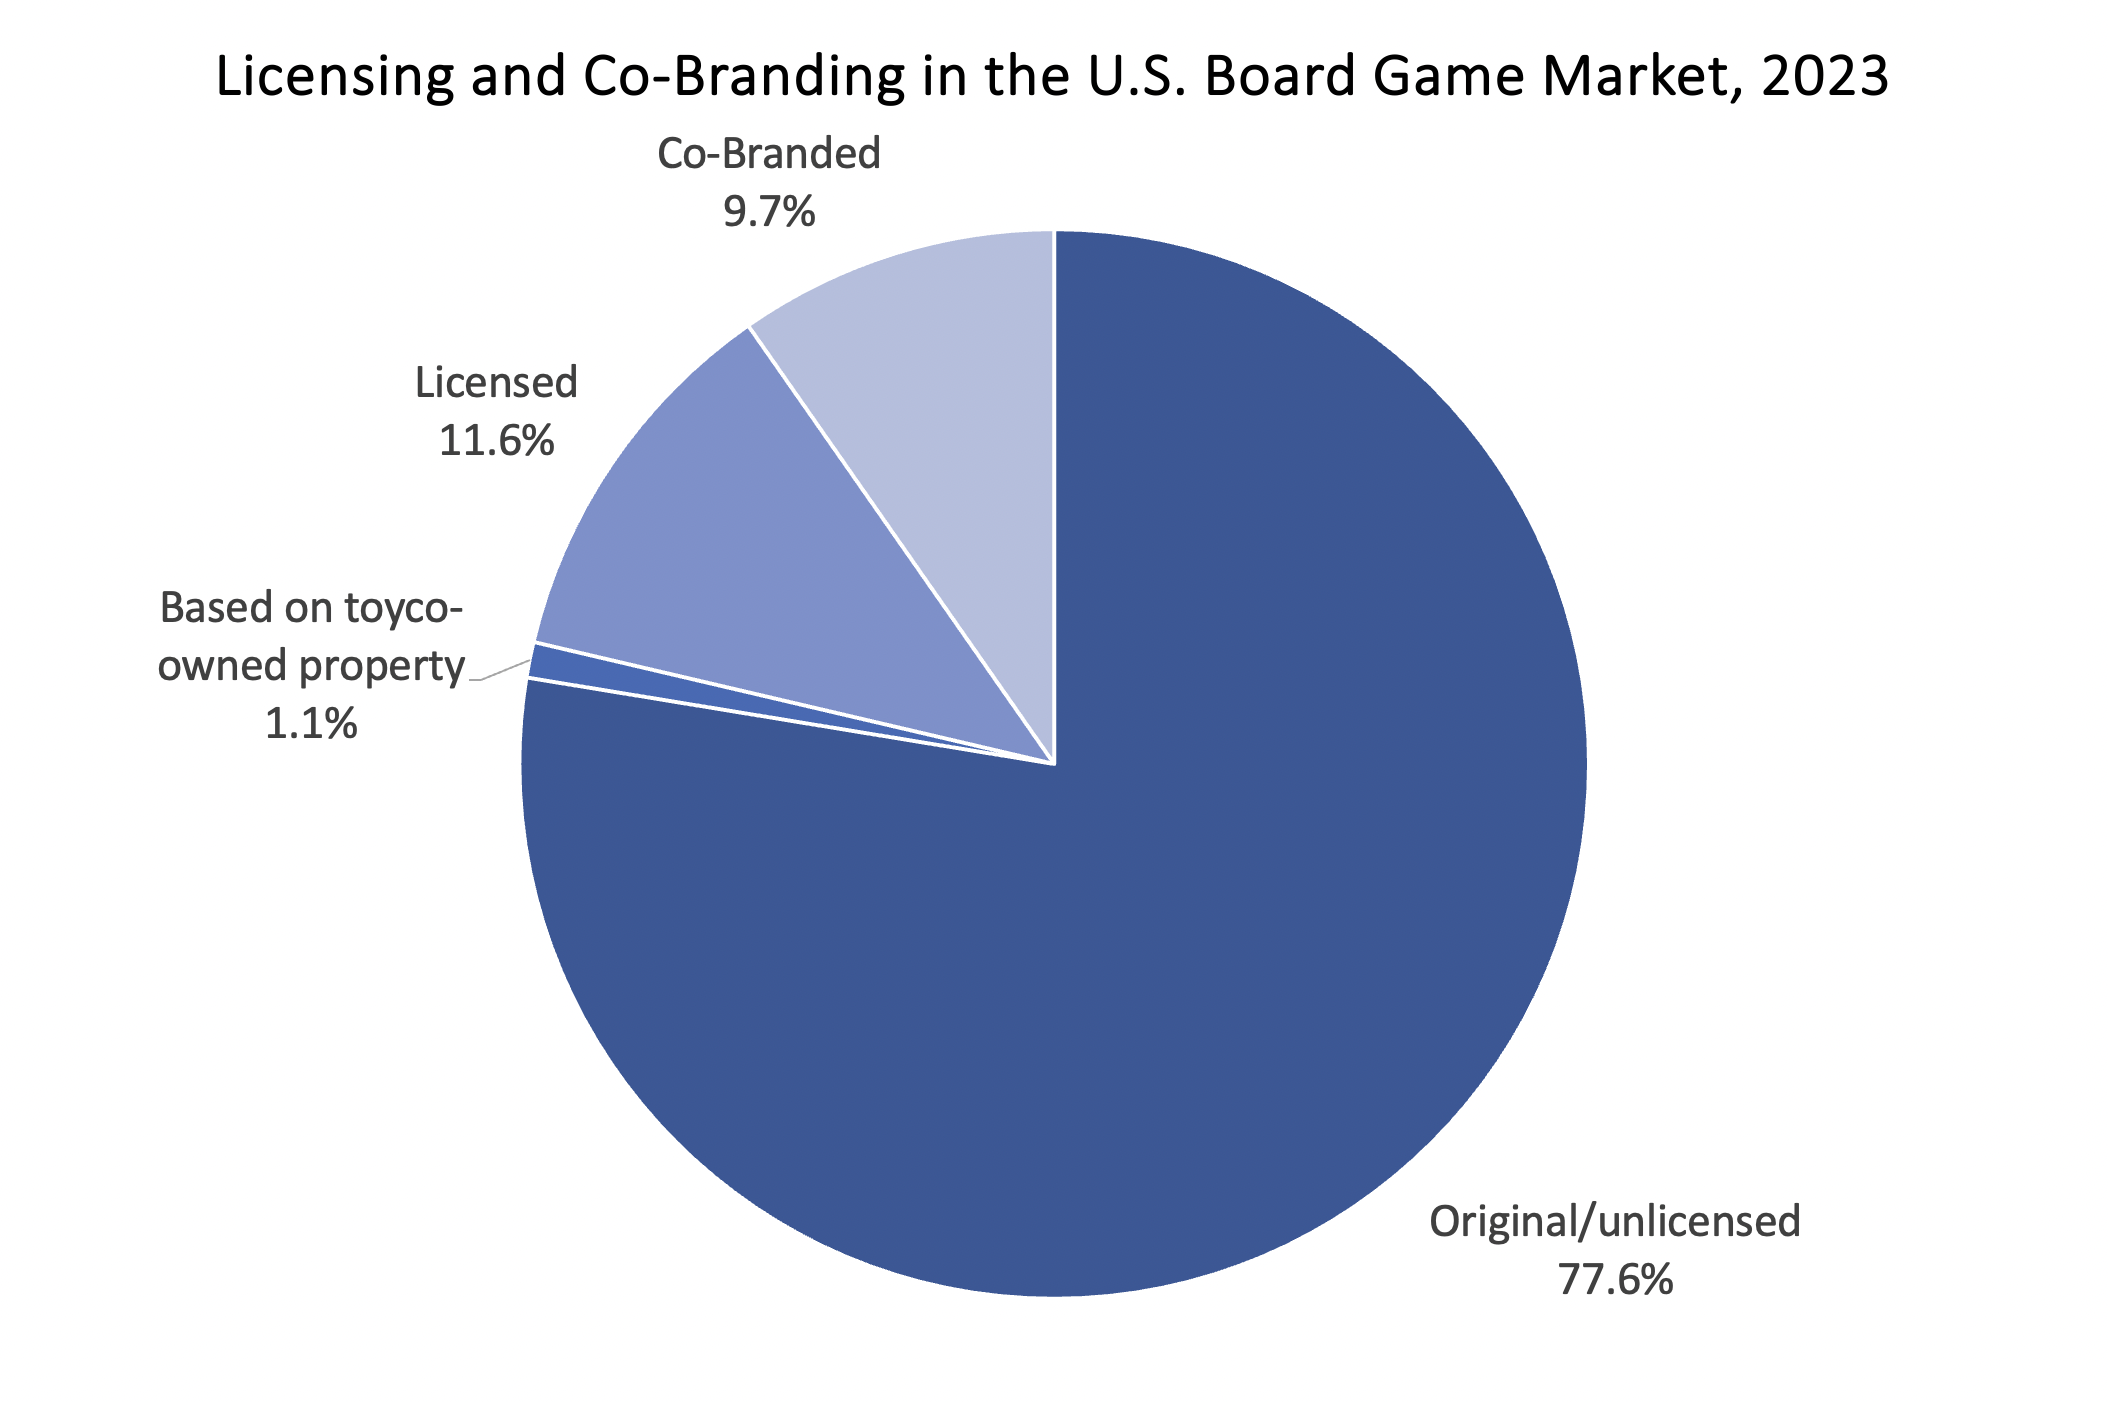 Ground Up Shoe Brand Inks Licensing Deals with Mattel, Hasbro for